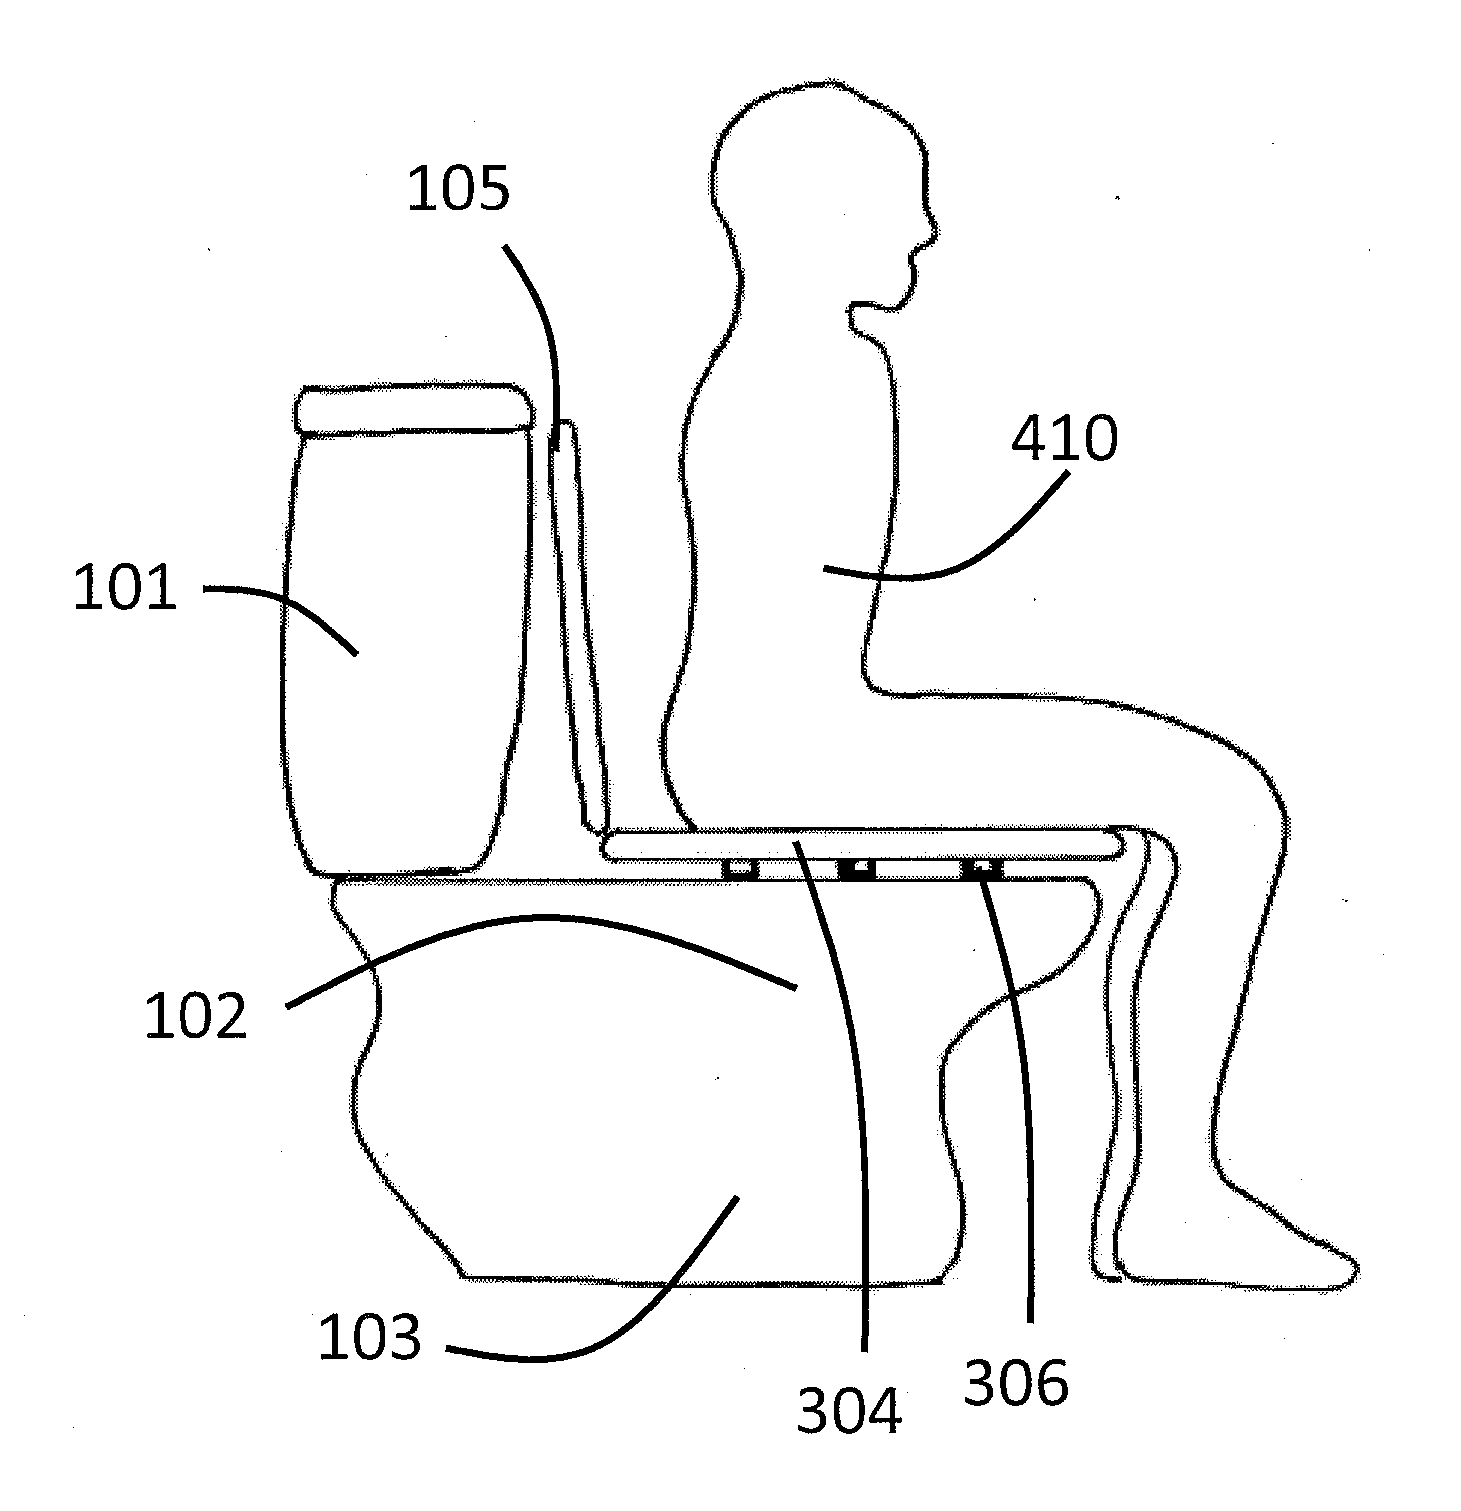 Therapeutic light enabled toilet and methods for operating a therapeutic light source